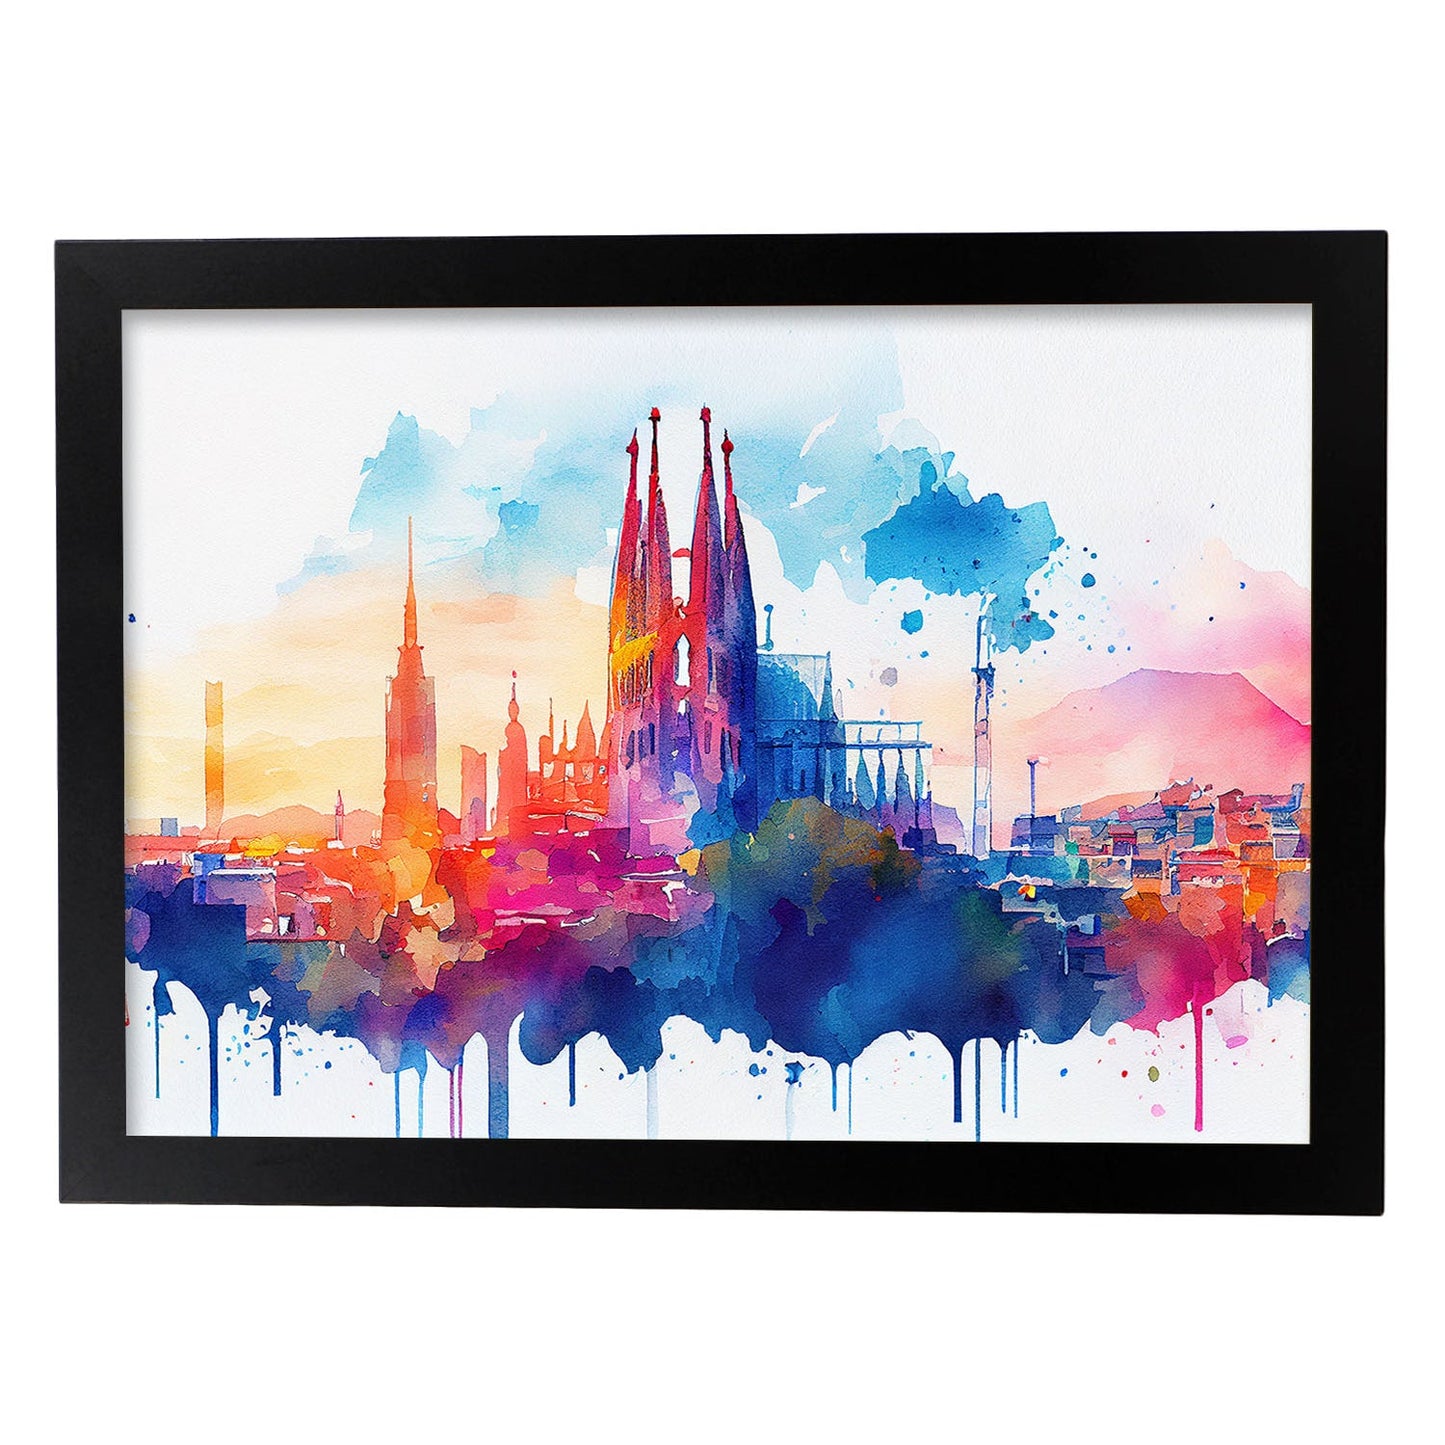 Nacnic watercolor of a skyline of the city of Barcelona_1. Aesthetic Wall Art Prints for Bedroom or Living Room Design.